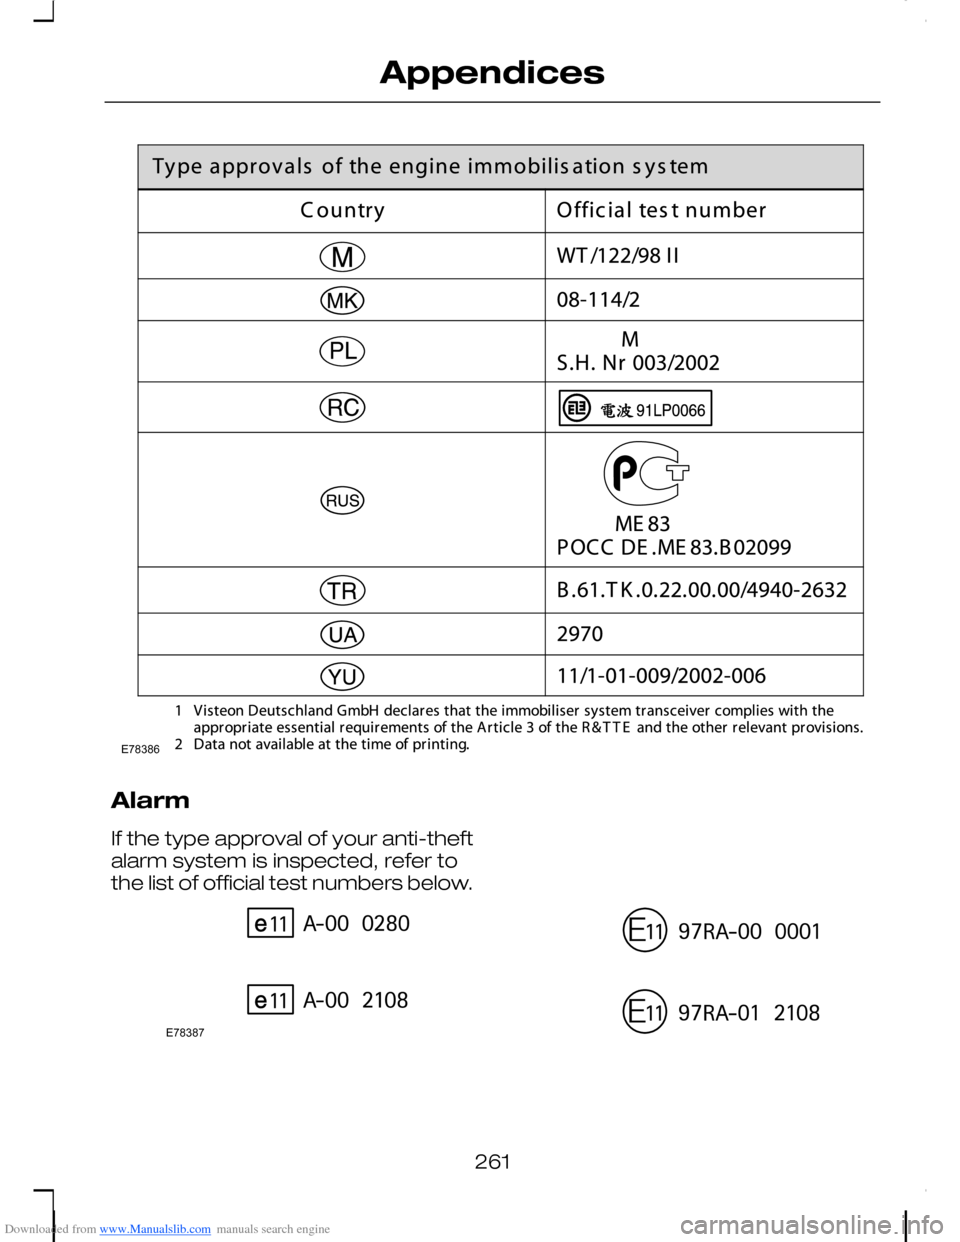 FORD C MAX 2008 1.G Owners Manual Downloaded from www.Manualslib.com manuals search engine Alarm
If the type approval of your anti-theftalarm system is inspected, refer tothe list of official test numbers below.
261
AppendicesE78386 E